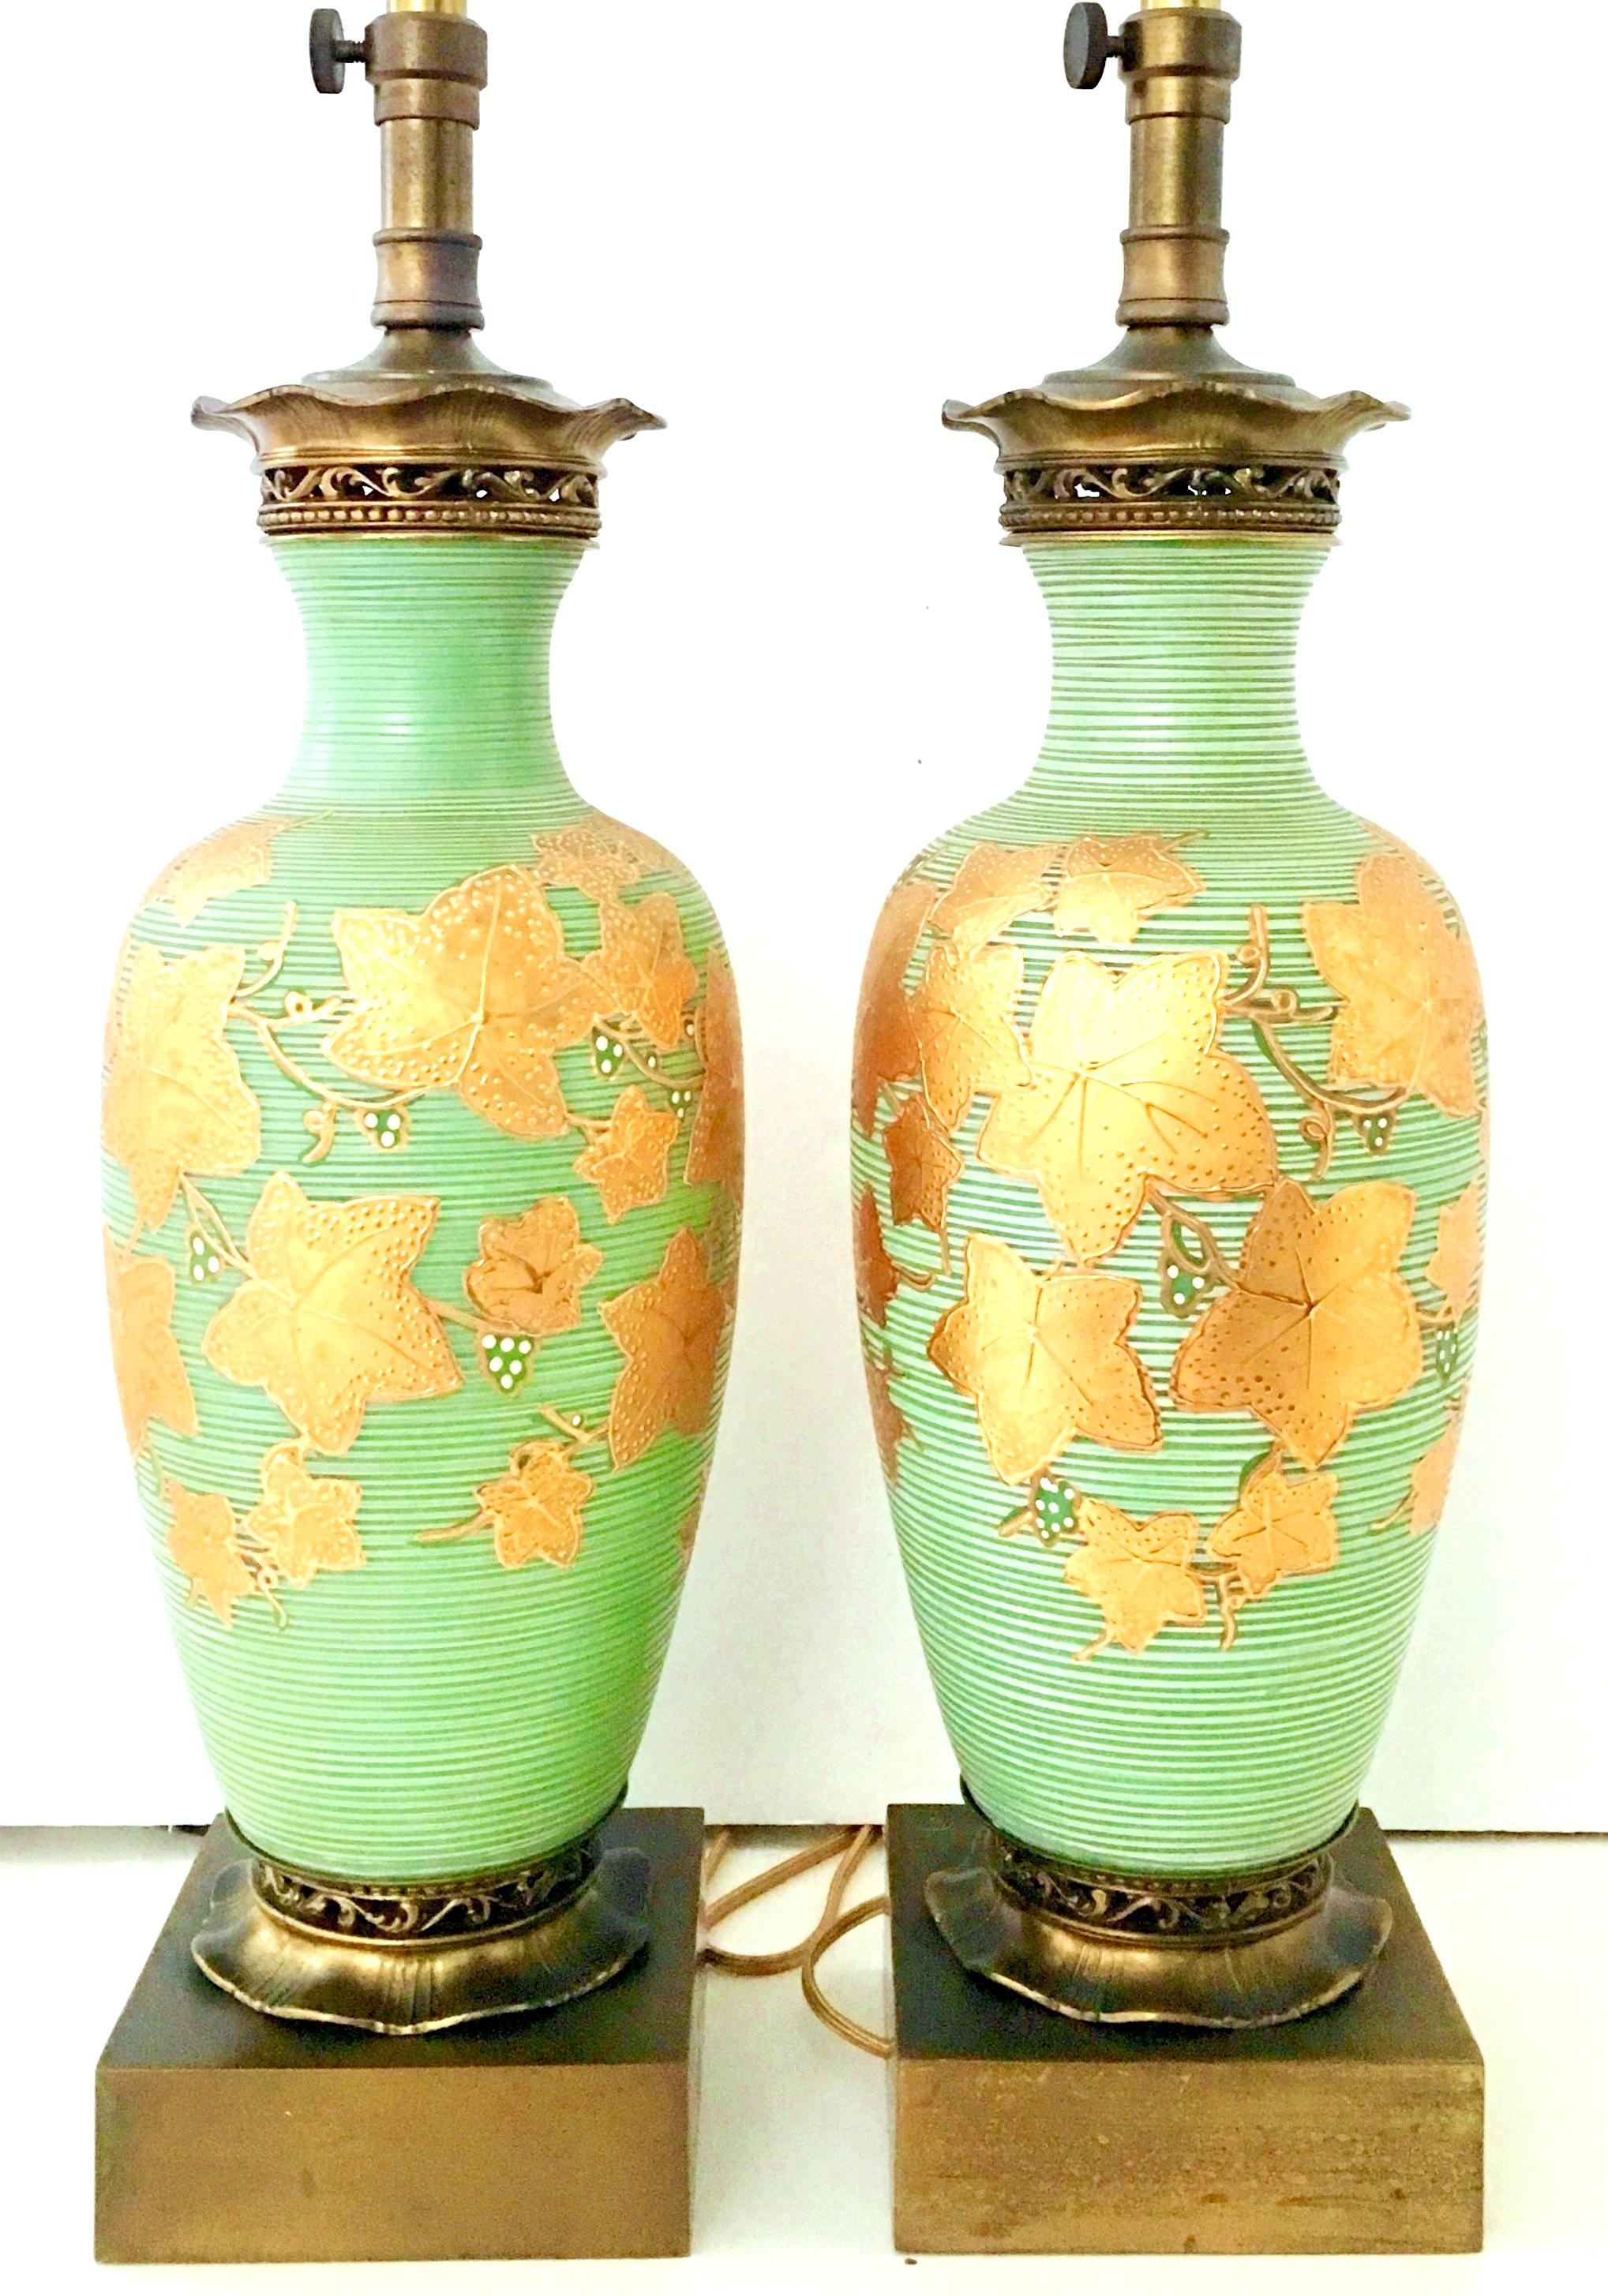 Antique Pair Of Italian Venetian Blown Art Glass, 22-Karat Gold & Brass Hand Painted Table Lamps . These finely crafted and unique lamps are executed in celery green and white opaque swirled Venetian blown glass with thick, raised 22-karat gold